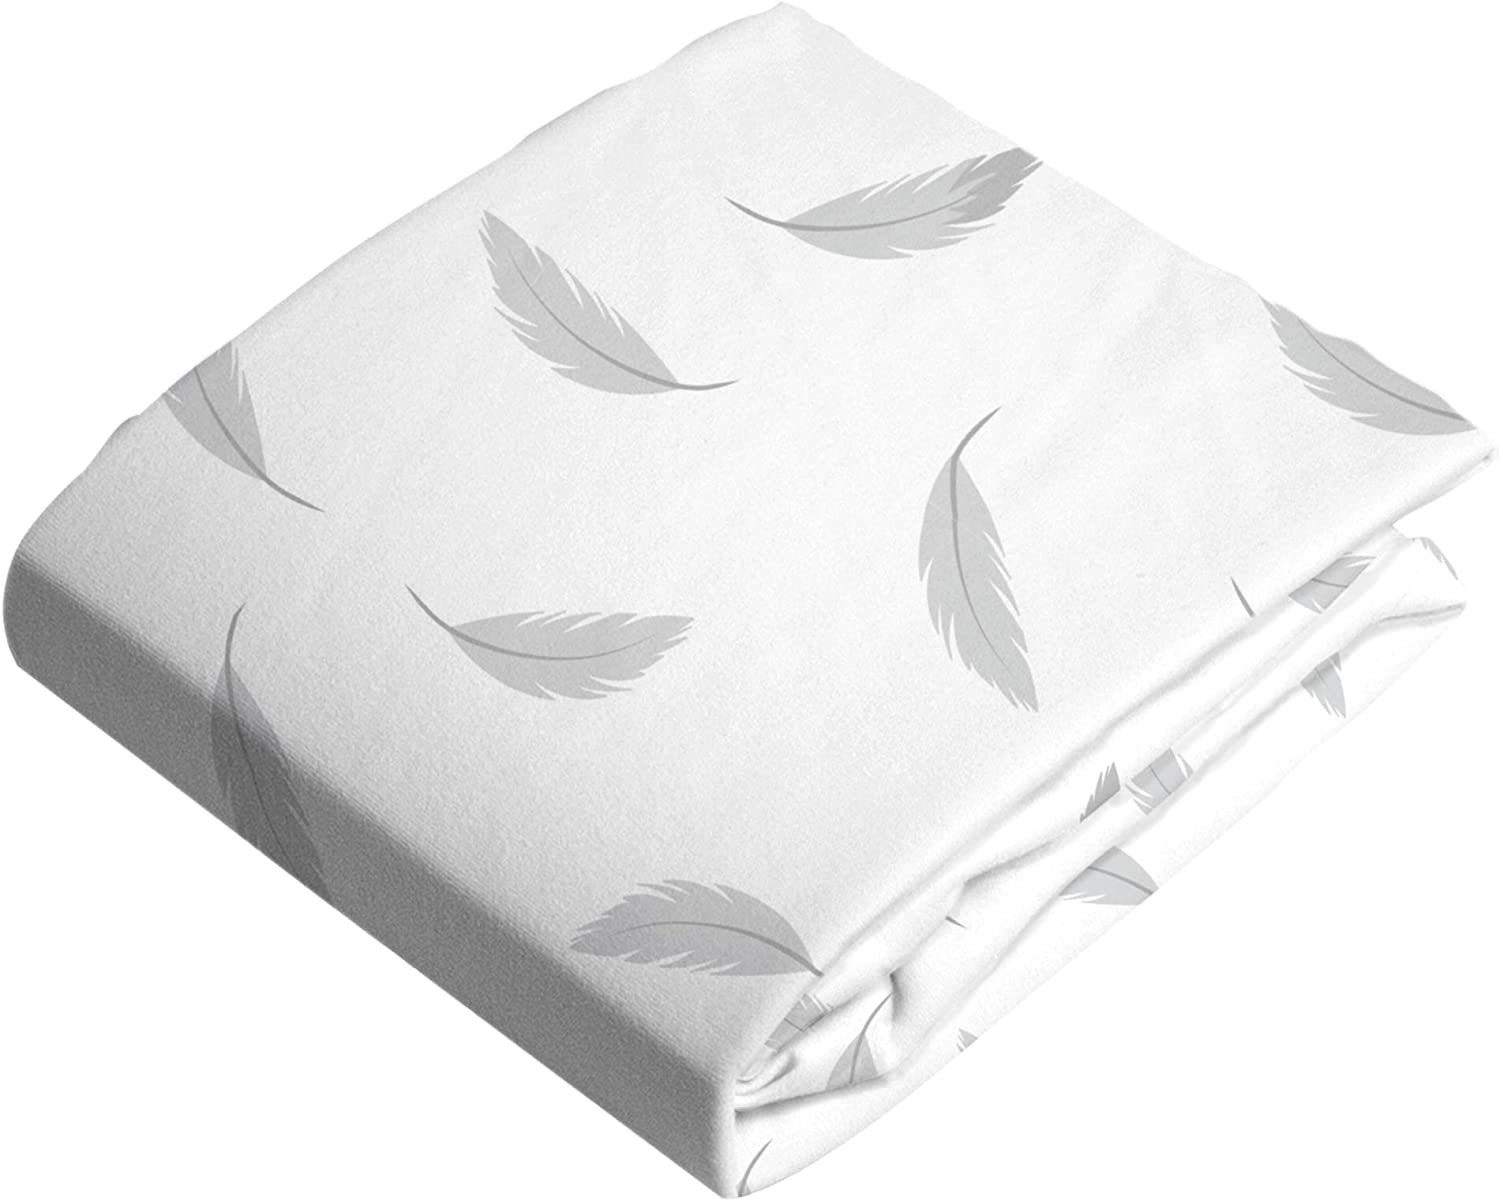 Kushies Baby 100% Breathable Cotton Flannel Contoured Changing Pad Cover with Slits for Safety Straps, Made in Canada, 17" x 33" | Grey Feathers